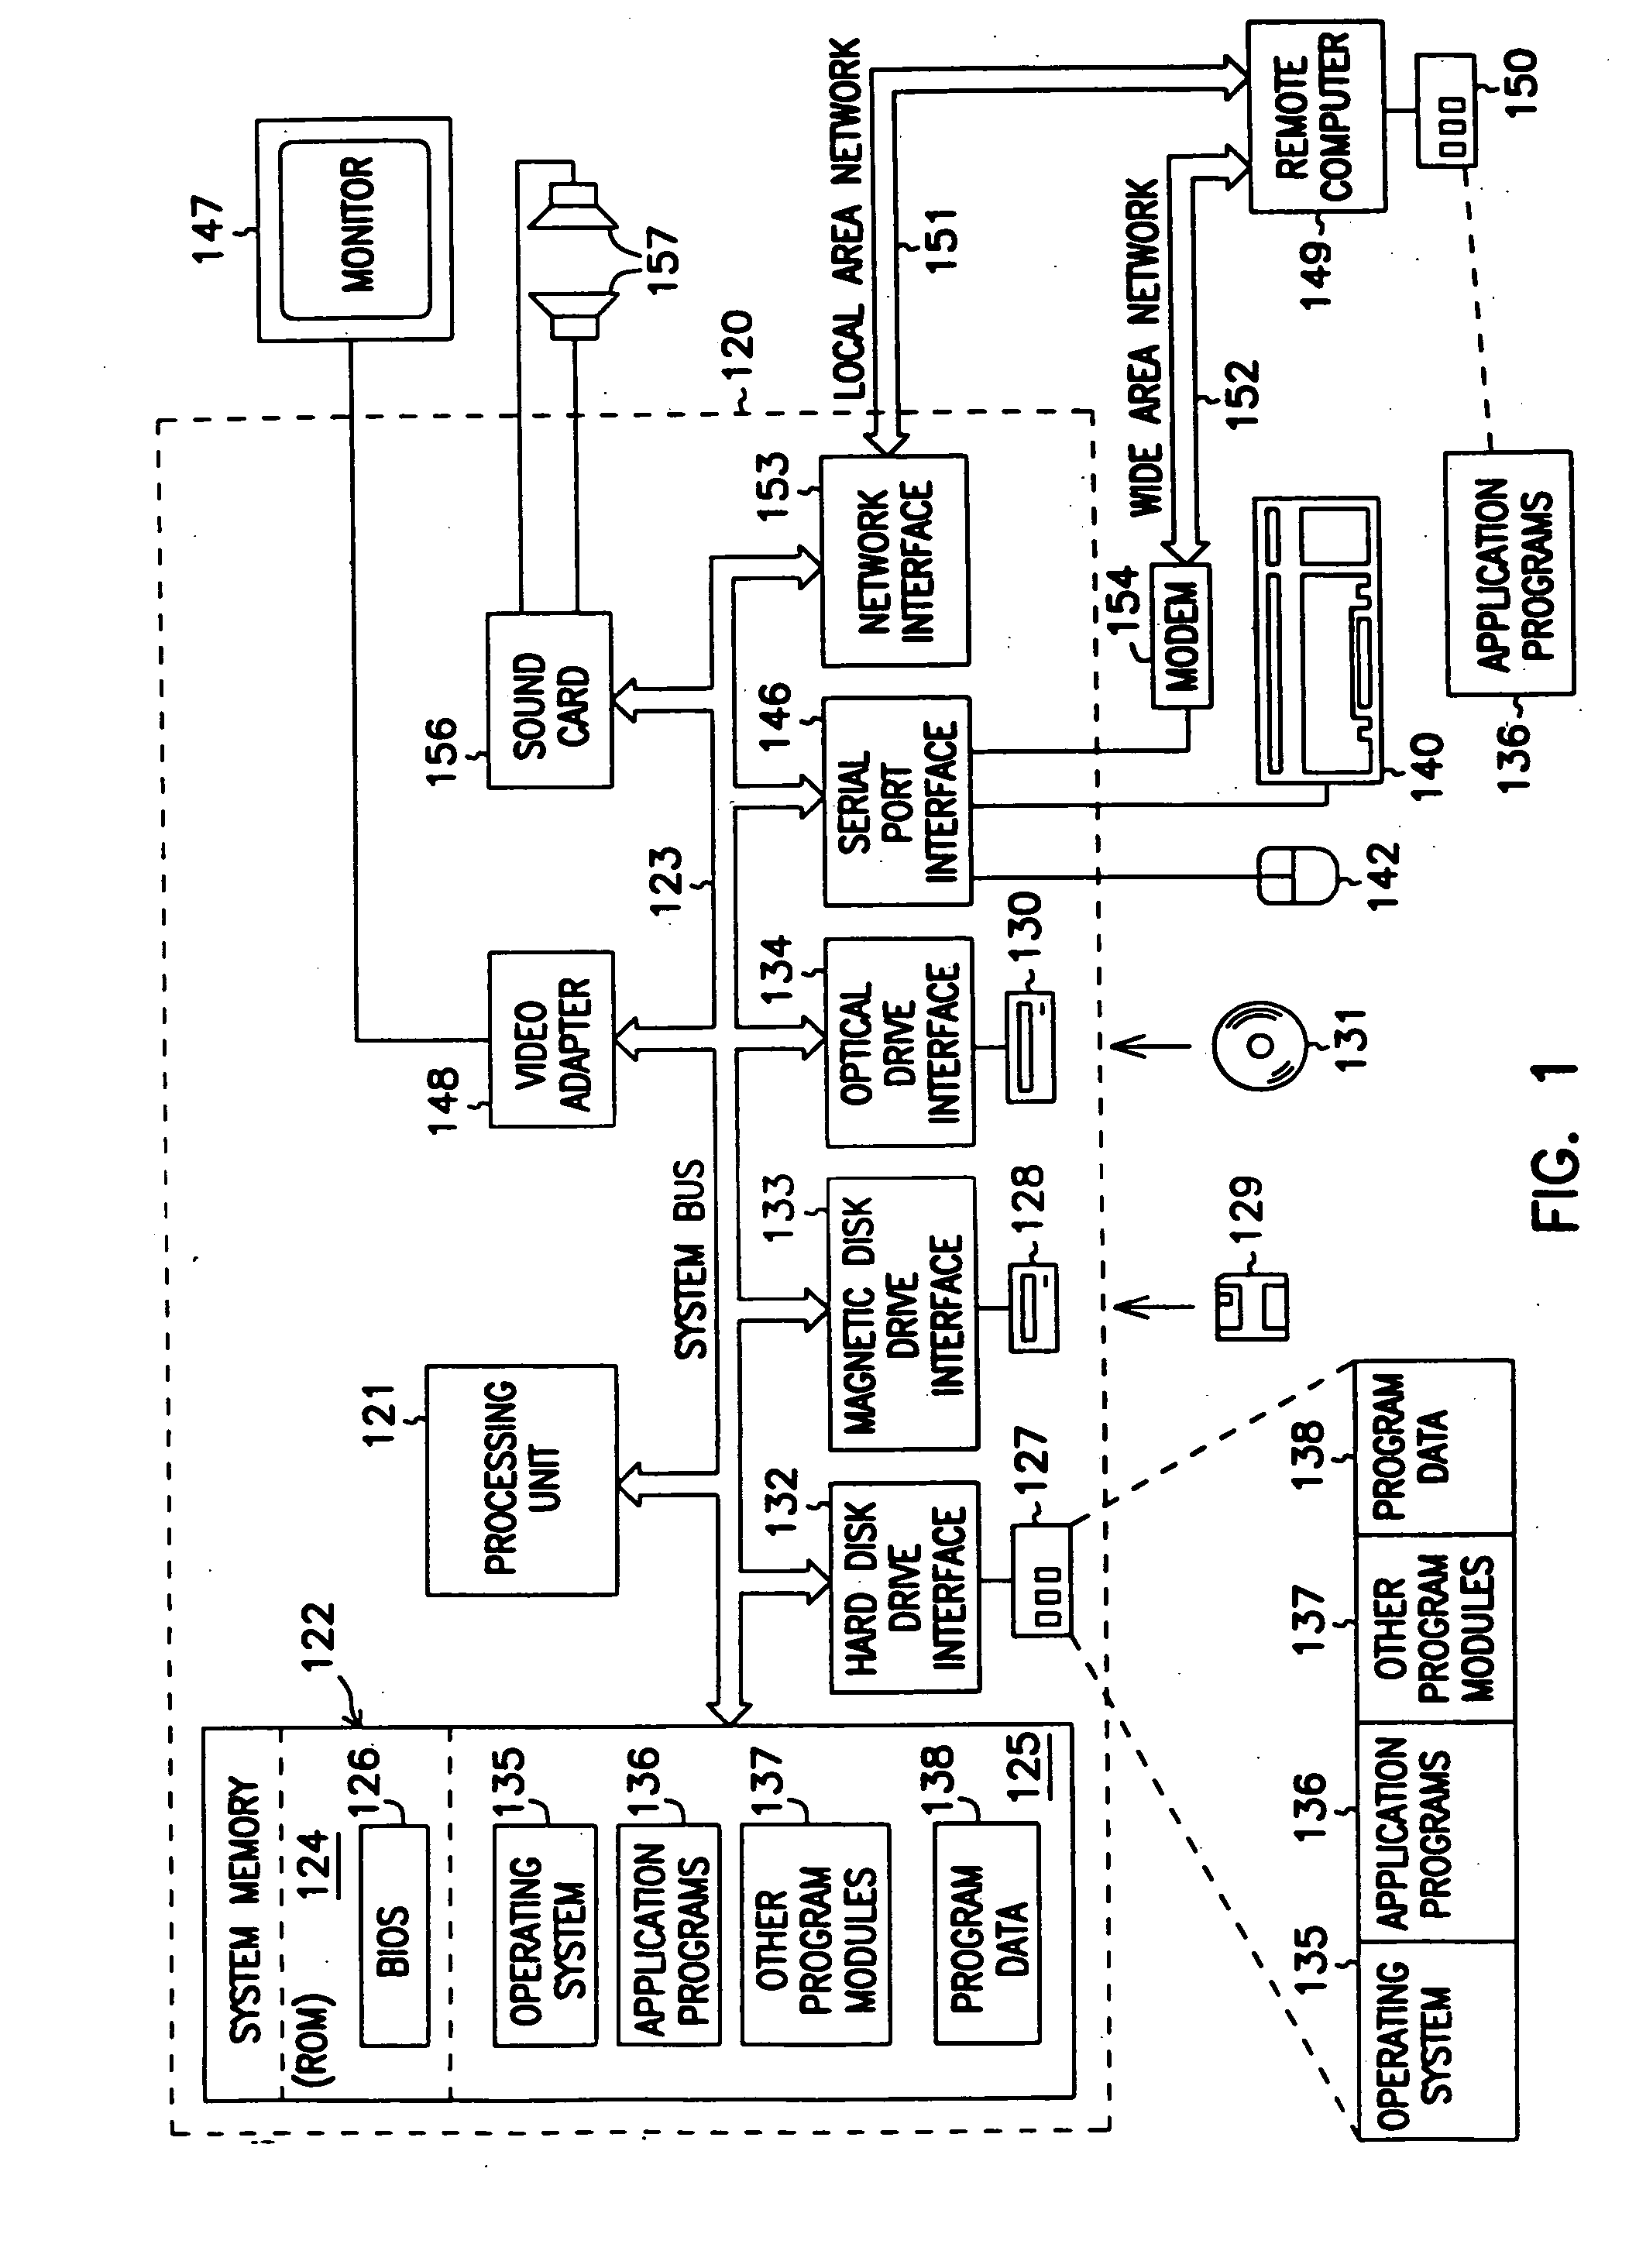 Methods for enhancing type reconstruction